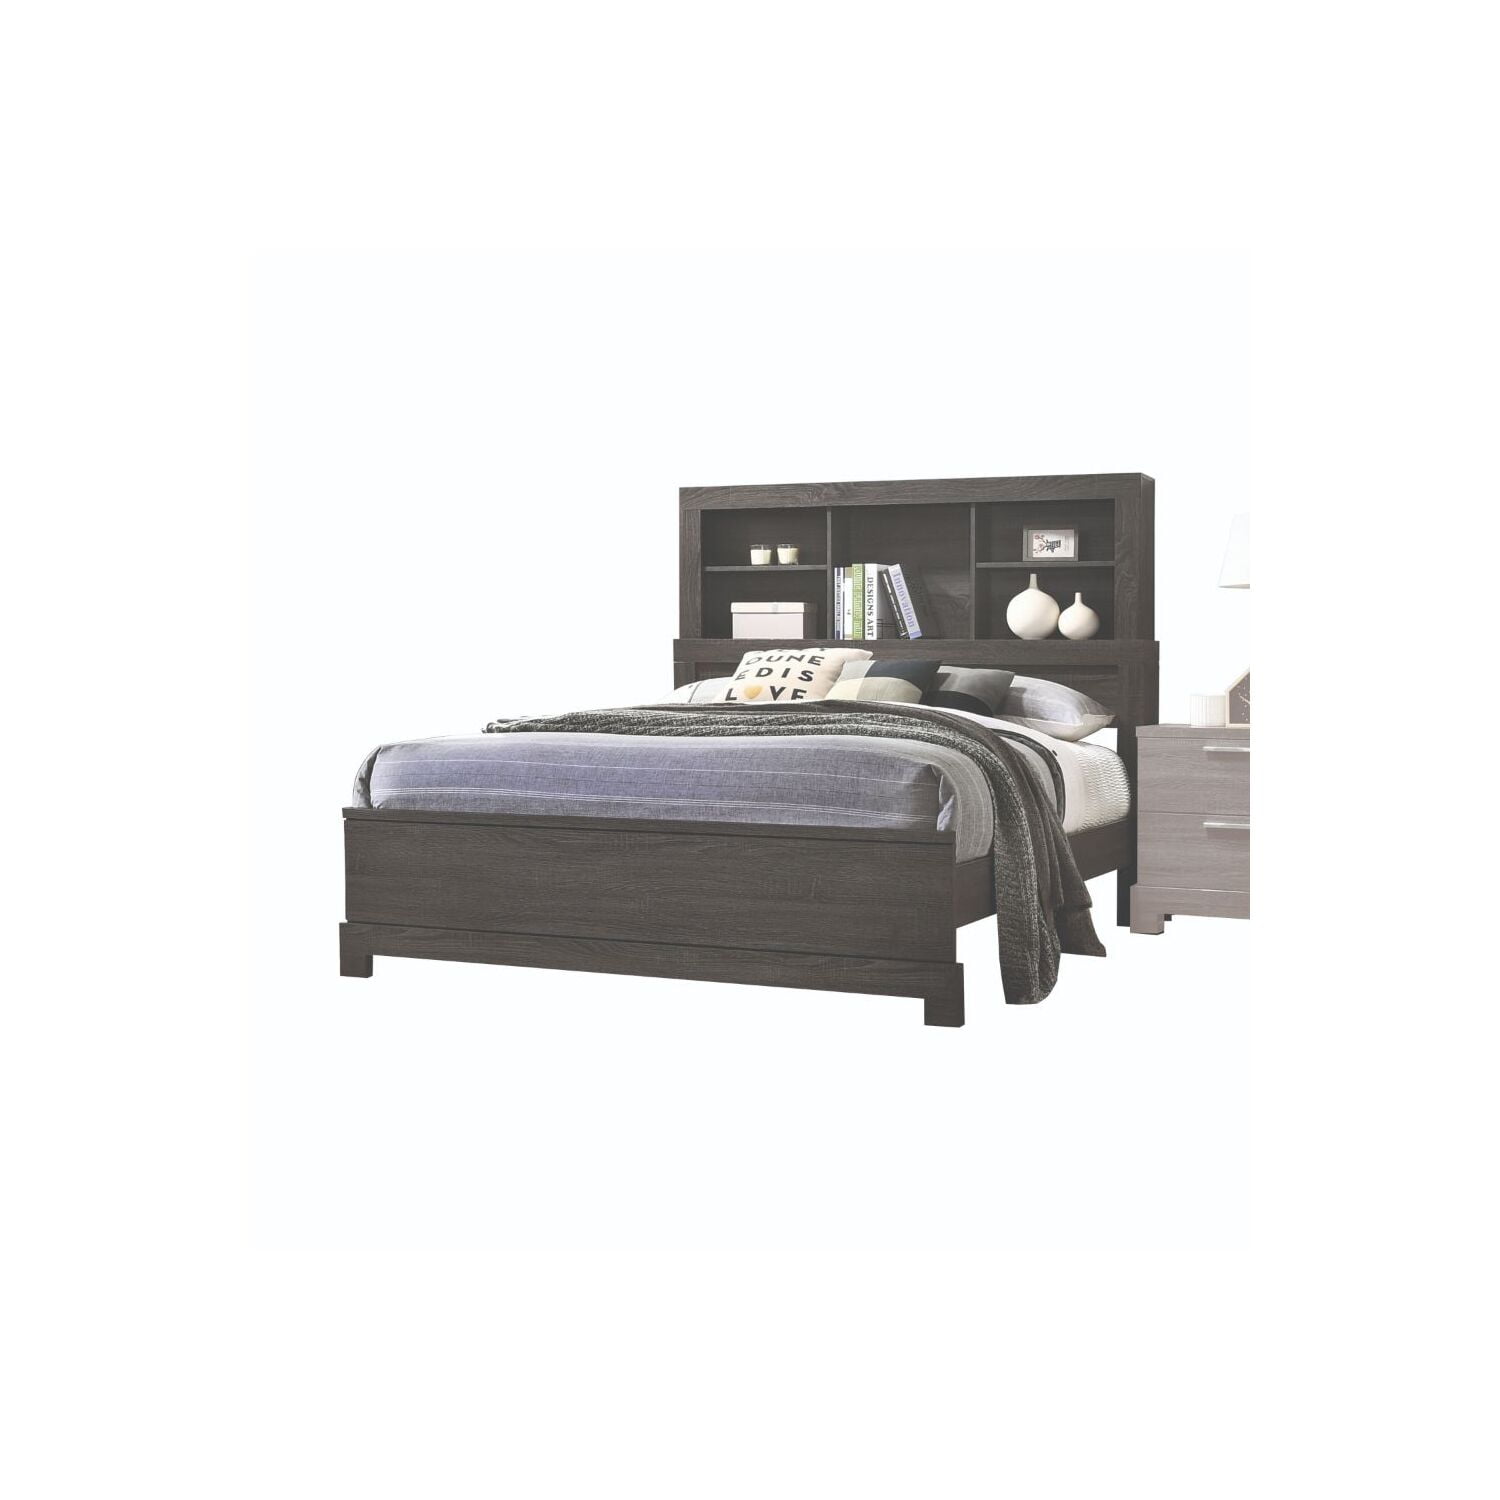 Picture of ACME 22027EK Lantha Eastern King Size Bed with Storage, Gray Oak - 2 Piece